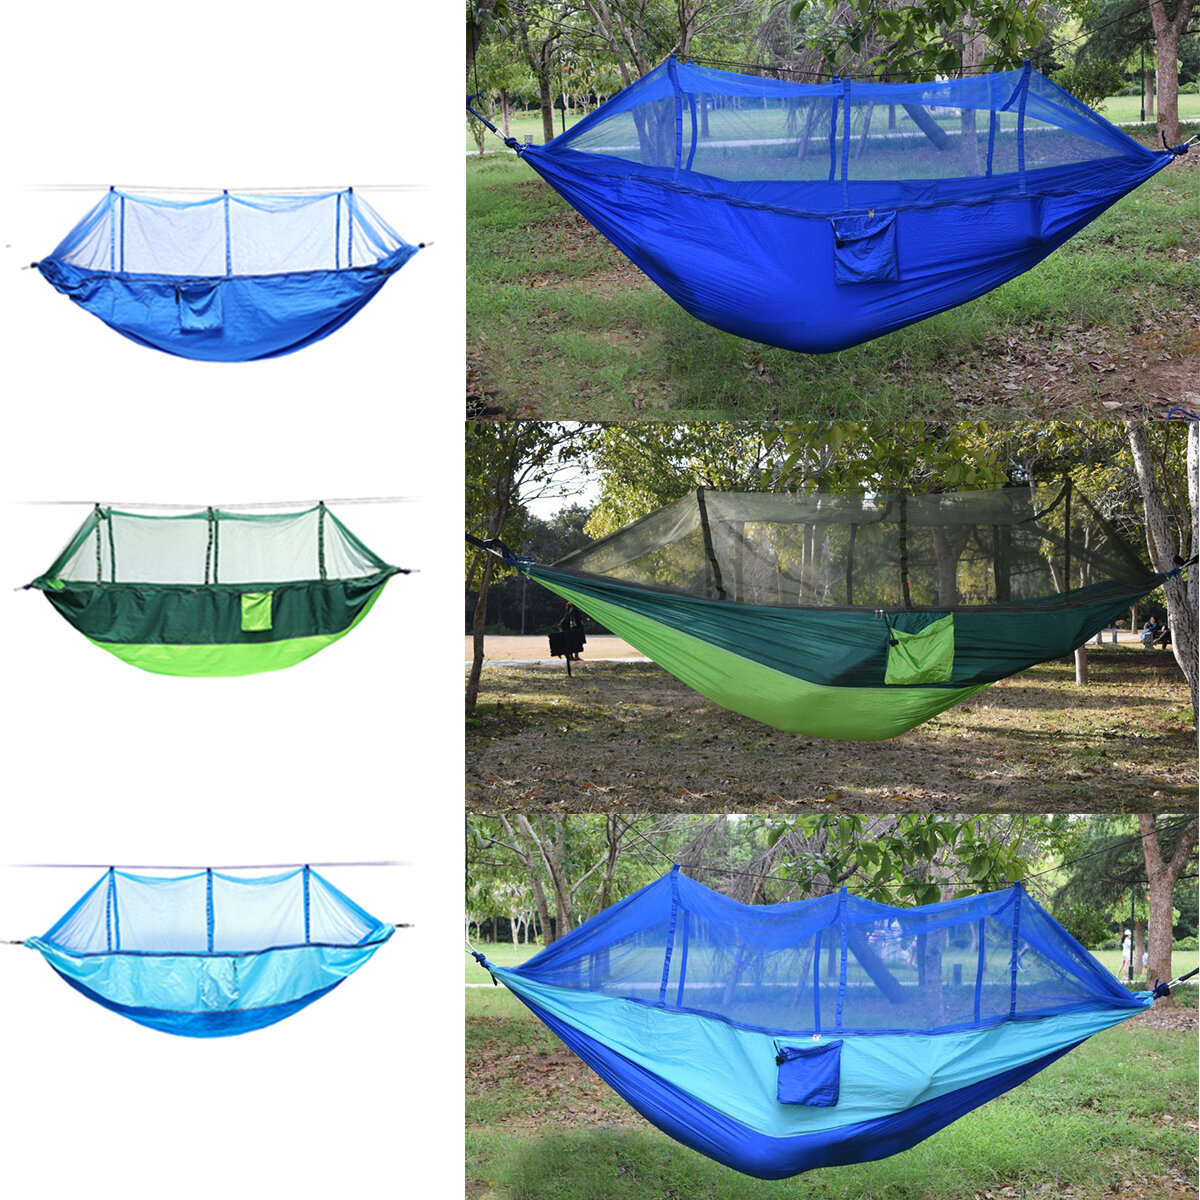 Outdoor Portable 2 People Double Hammock Camping Tent Hanging Swing Bed With Mosquito Net